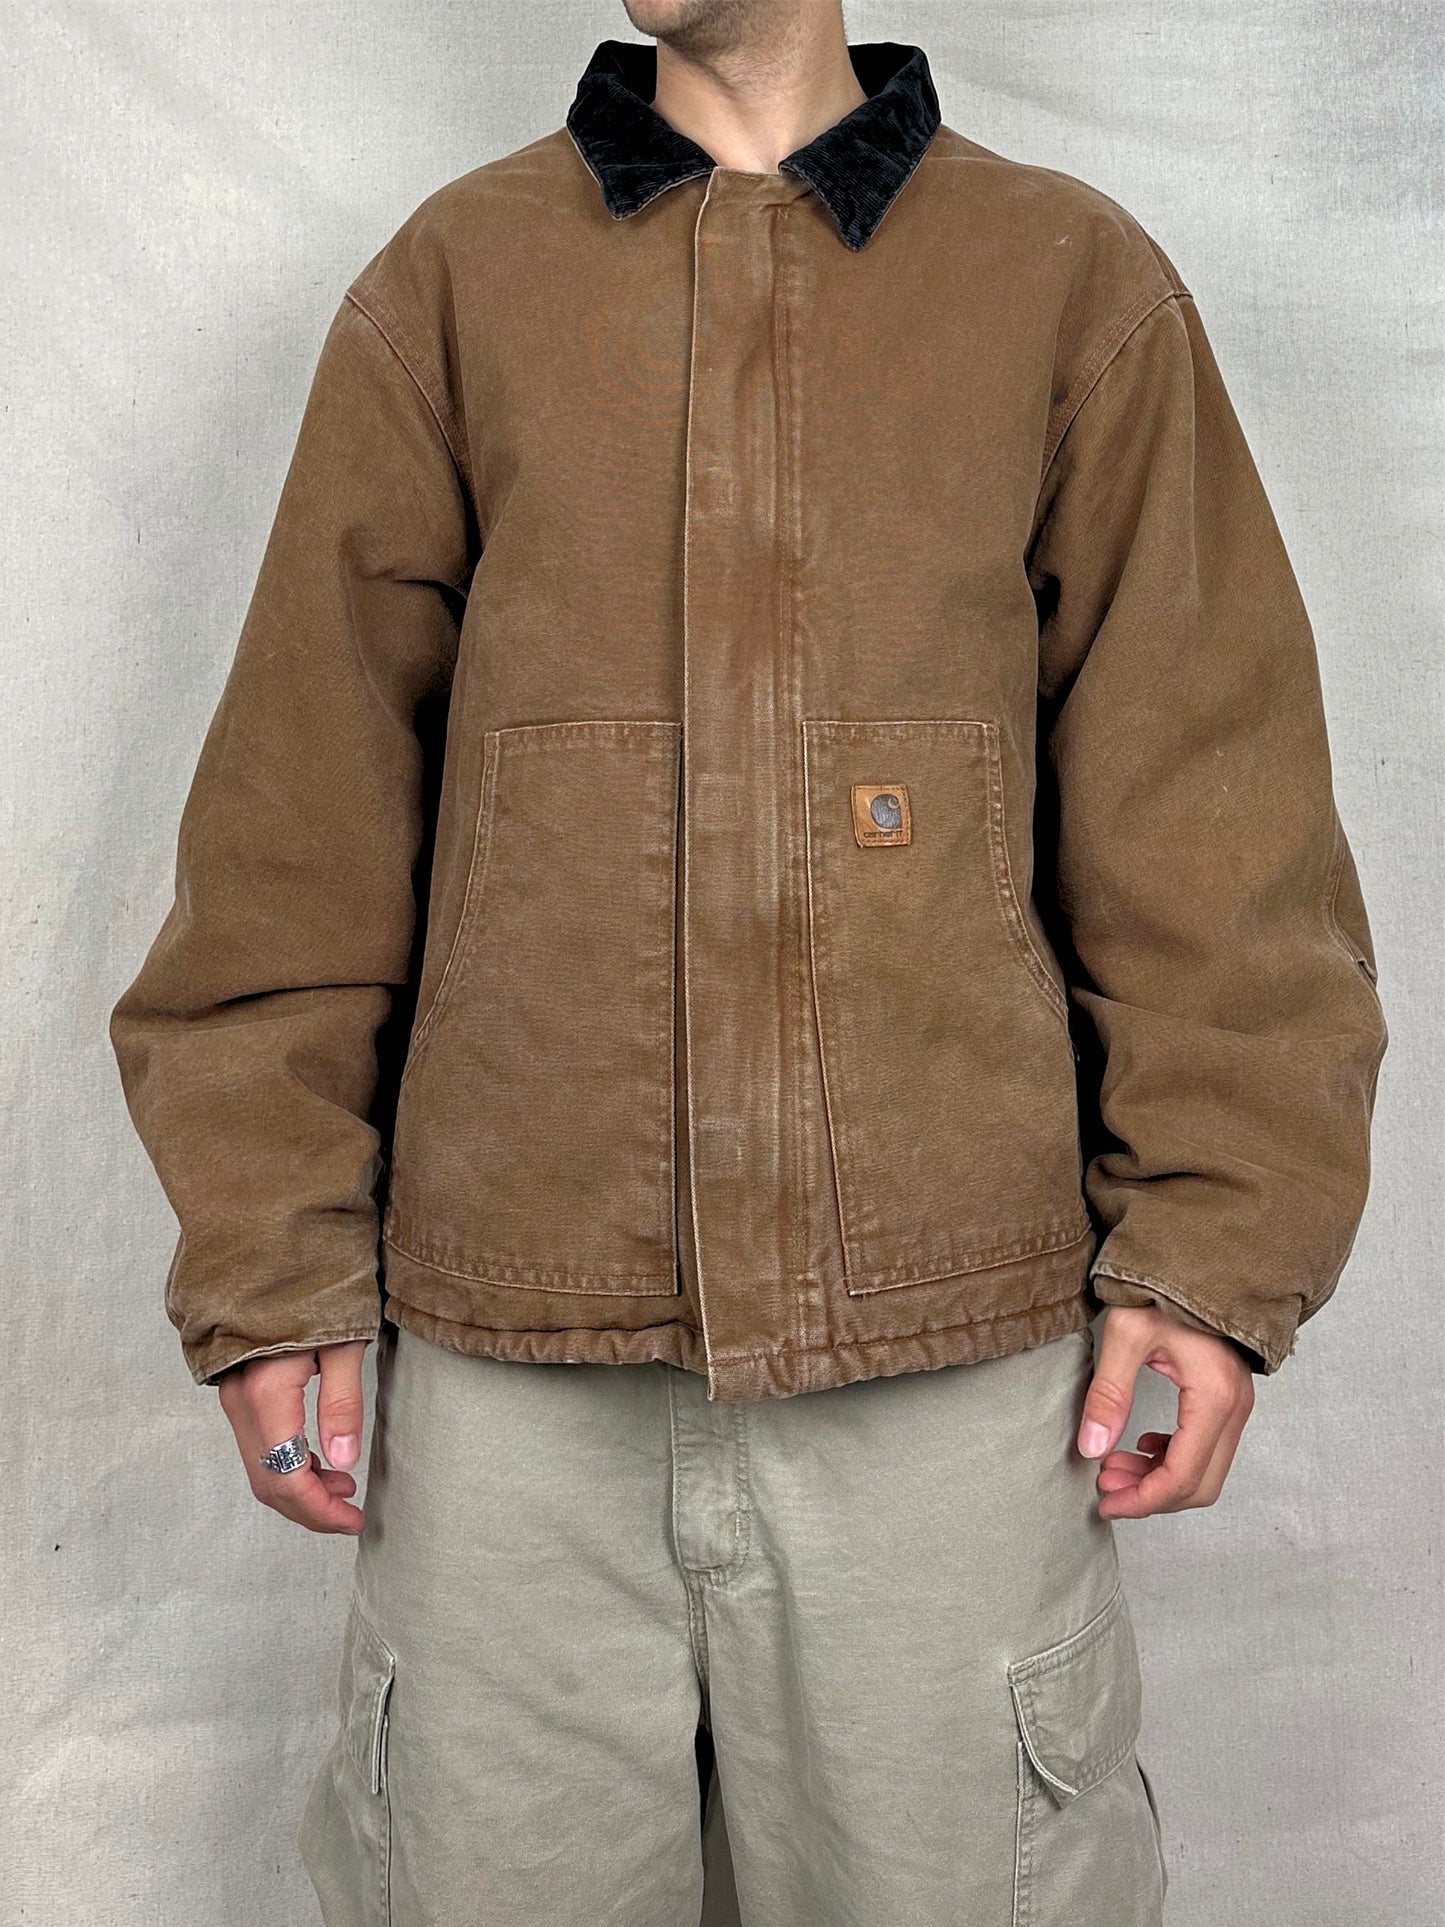 90's Carhartt Heavy Duty Quilt Lined Vintage Corduroy Collar Jacket Size 2XL